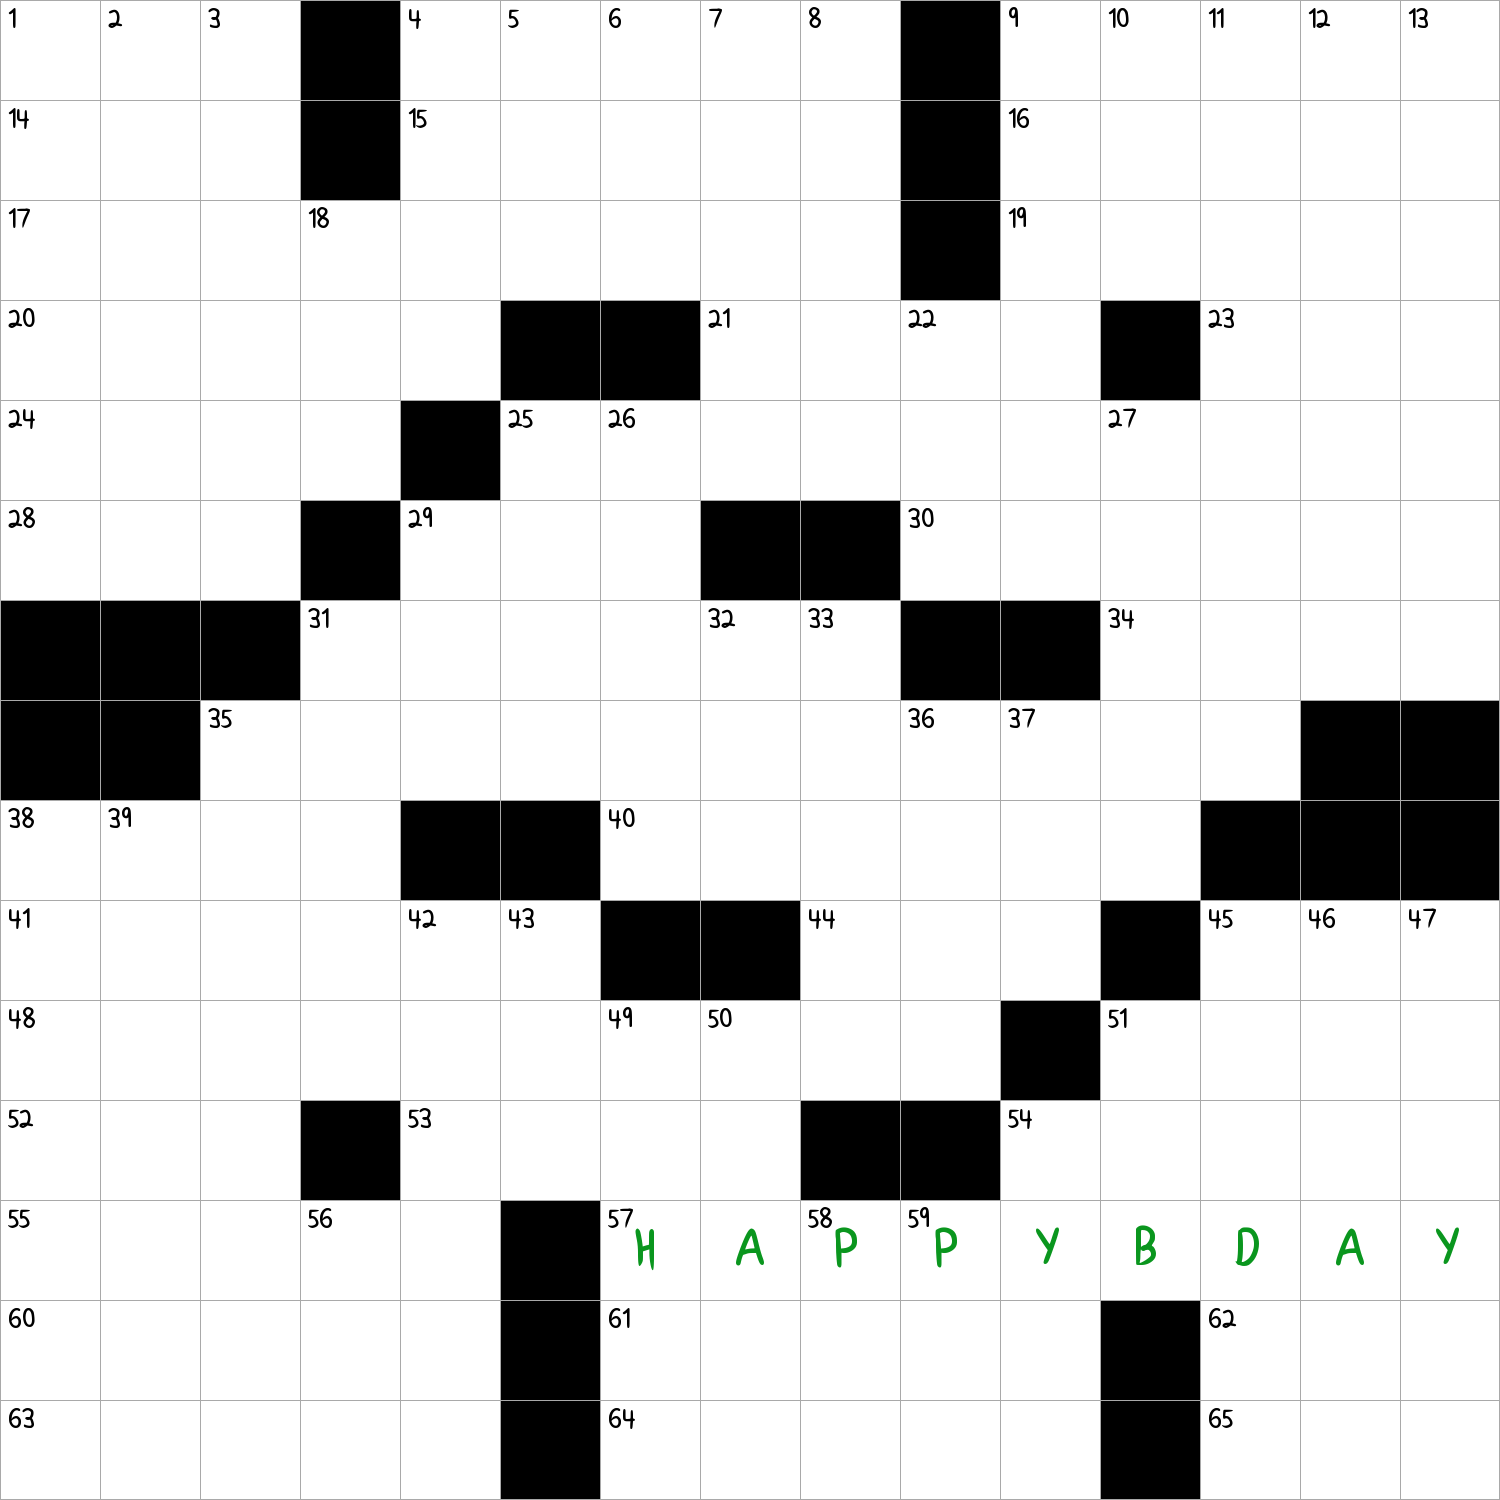 "Best wishes for your once-a-year celebration!" (and a wish for solvers of this puzzle)